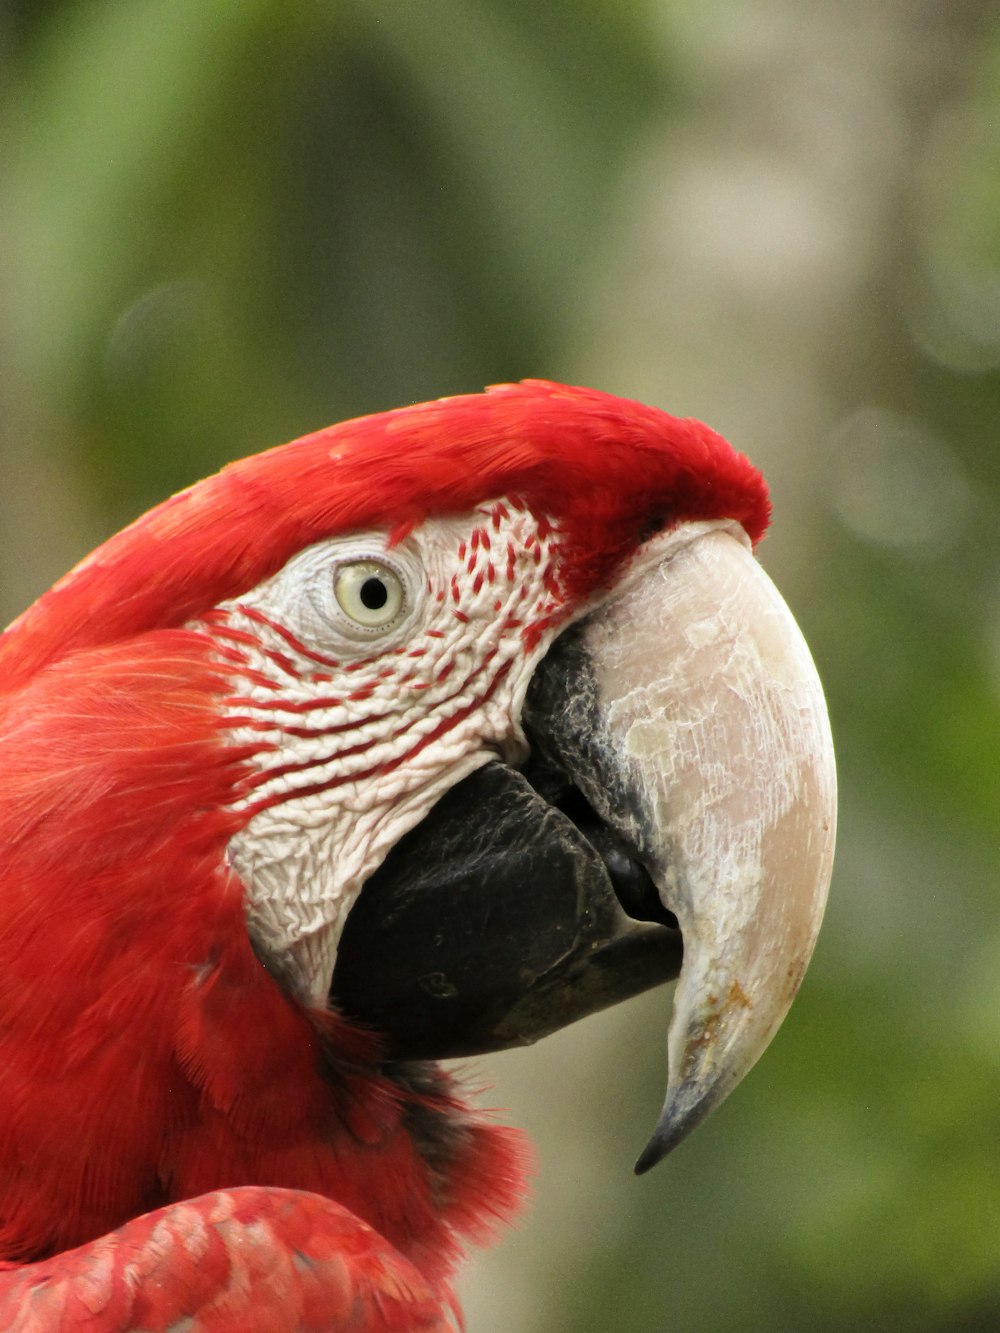 a close up of a red parrot with a black beak